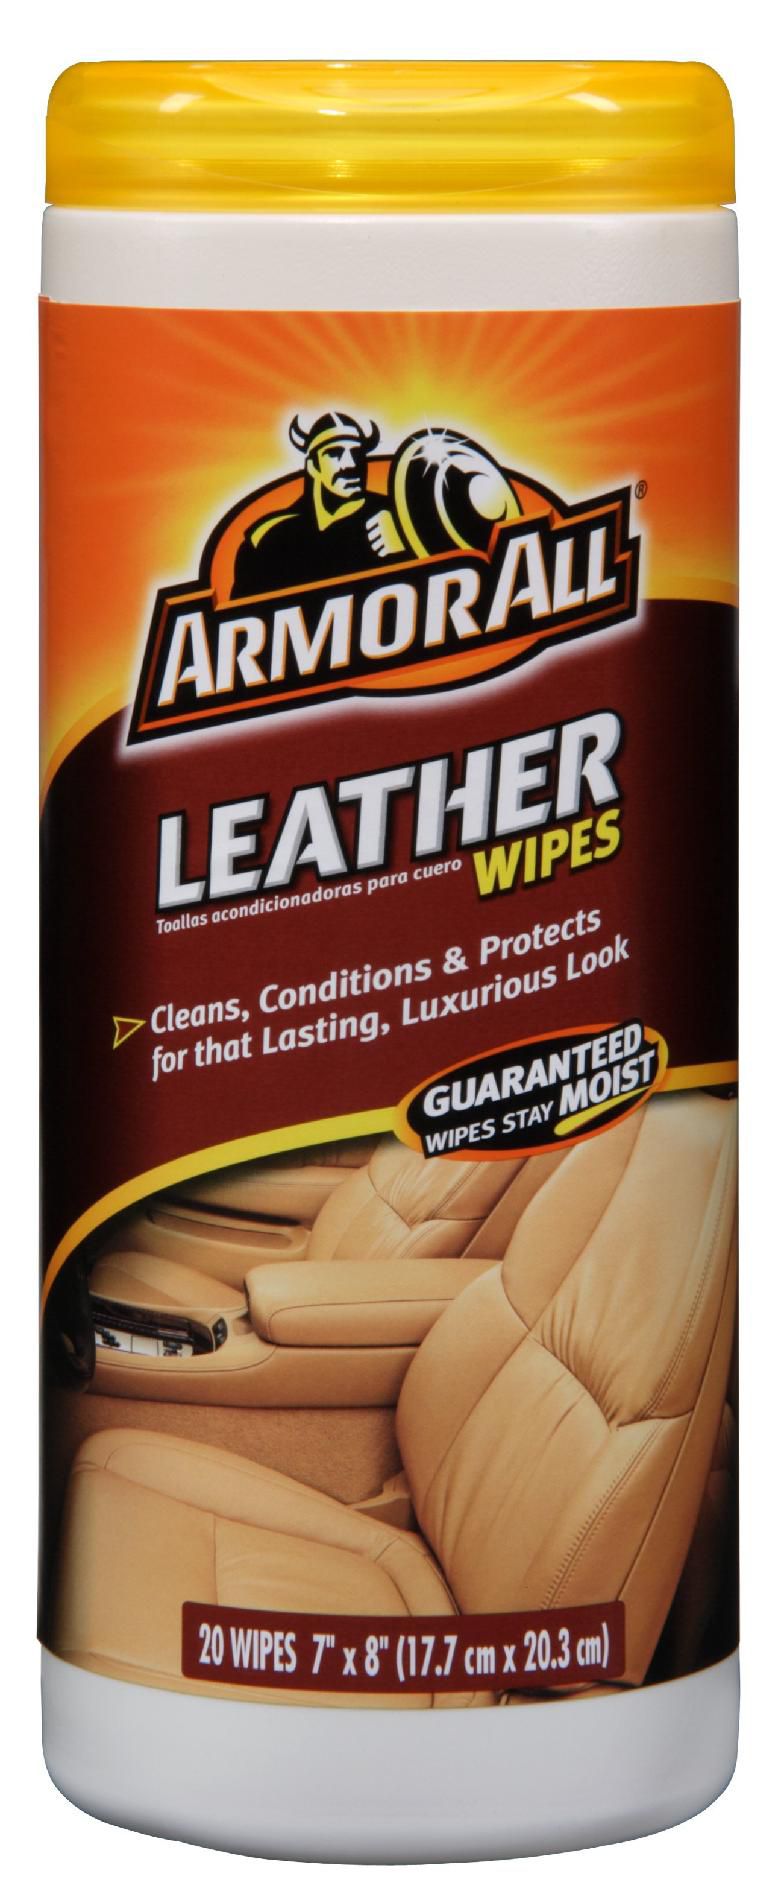 Armor All leather cleaning wipes 20ct.